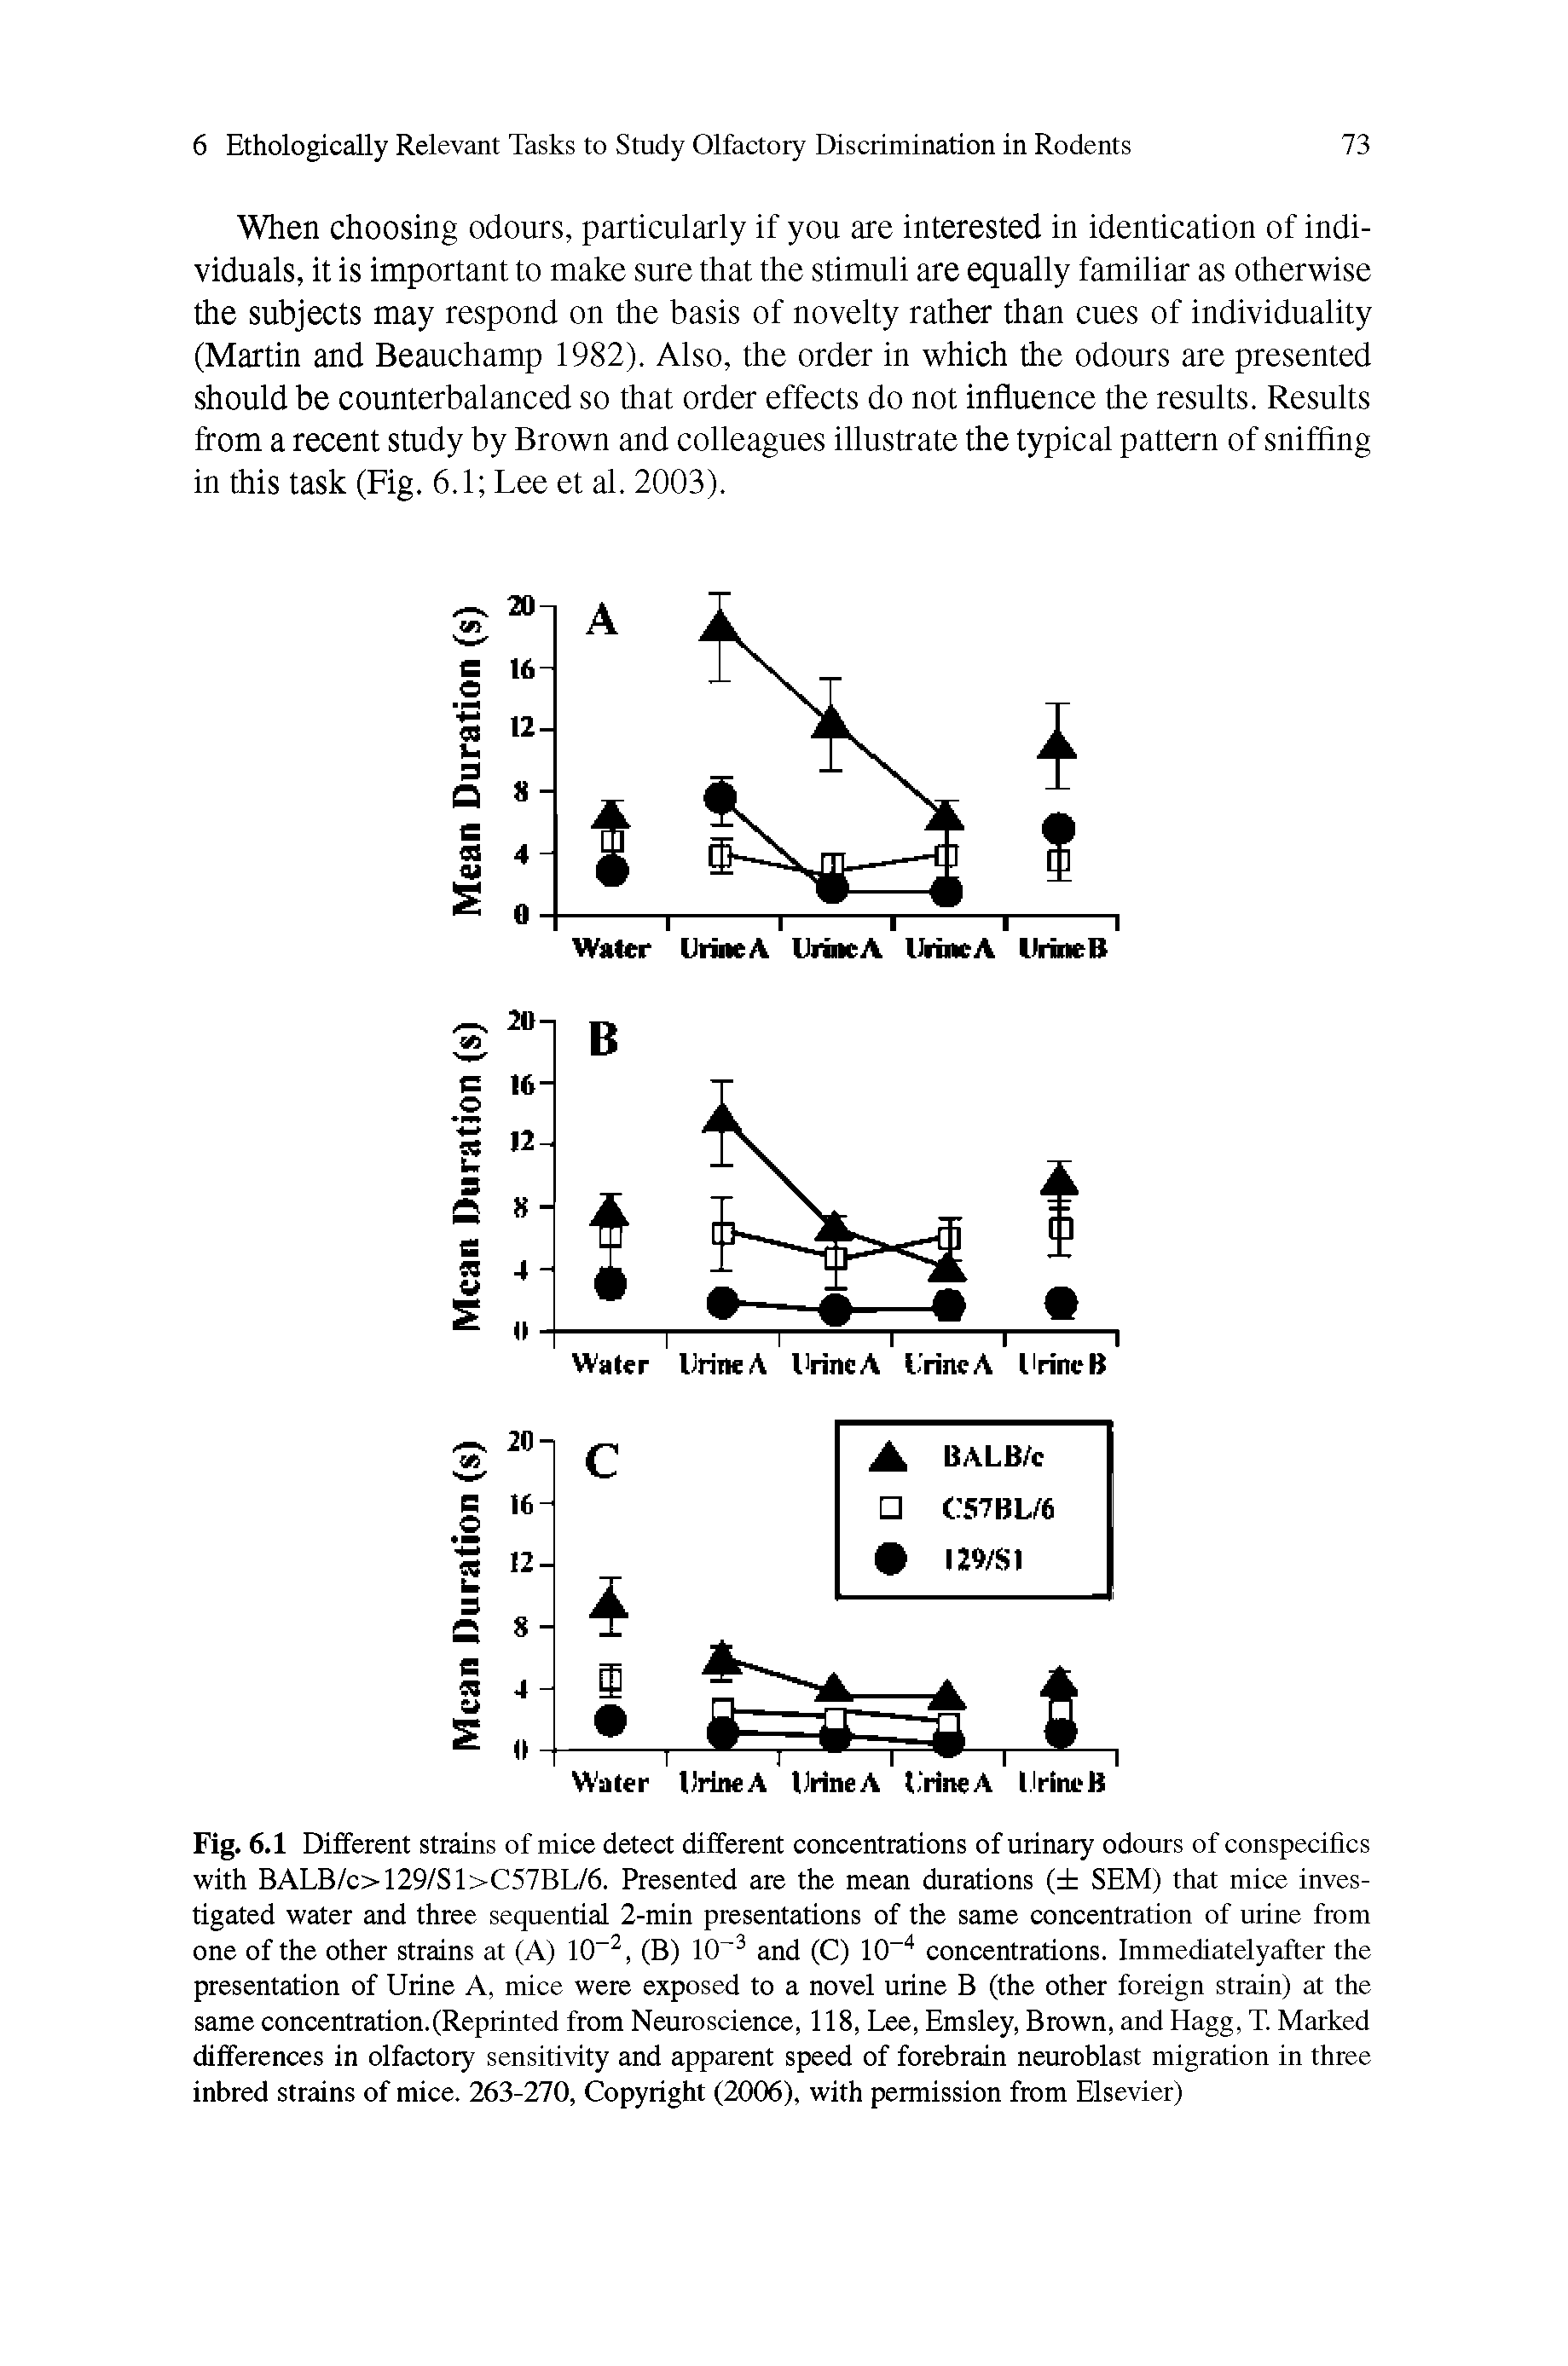 Fig. 6.1 Different strains of mice detect different concentrations of urinary odours of conspecifics with BALB/c>129/Sl>C57BL/6. Presented are the mean durations ( SEM) that mice investigated water and three sequential 2-min presentations of the same concentration of urine from one of the other strains at (A) 10 2, (B) 10 3 and (C) 10-4 concentrations. Immediatelyafter the presentation of Urine A, mice were exposed to a novel urine B (the other foreign strain) at the same concentration.(Reprinted from Neuroscience, 118, Lee, Emsley, Brown, and Hagg, T. Marked differences in olfactory sensitivity and apparent speed of forebrain neuroblast migration in three inbred strains of mice. 263-270, Copyright (2006), with permission from Elsevier)...